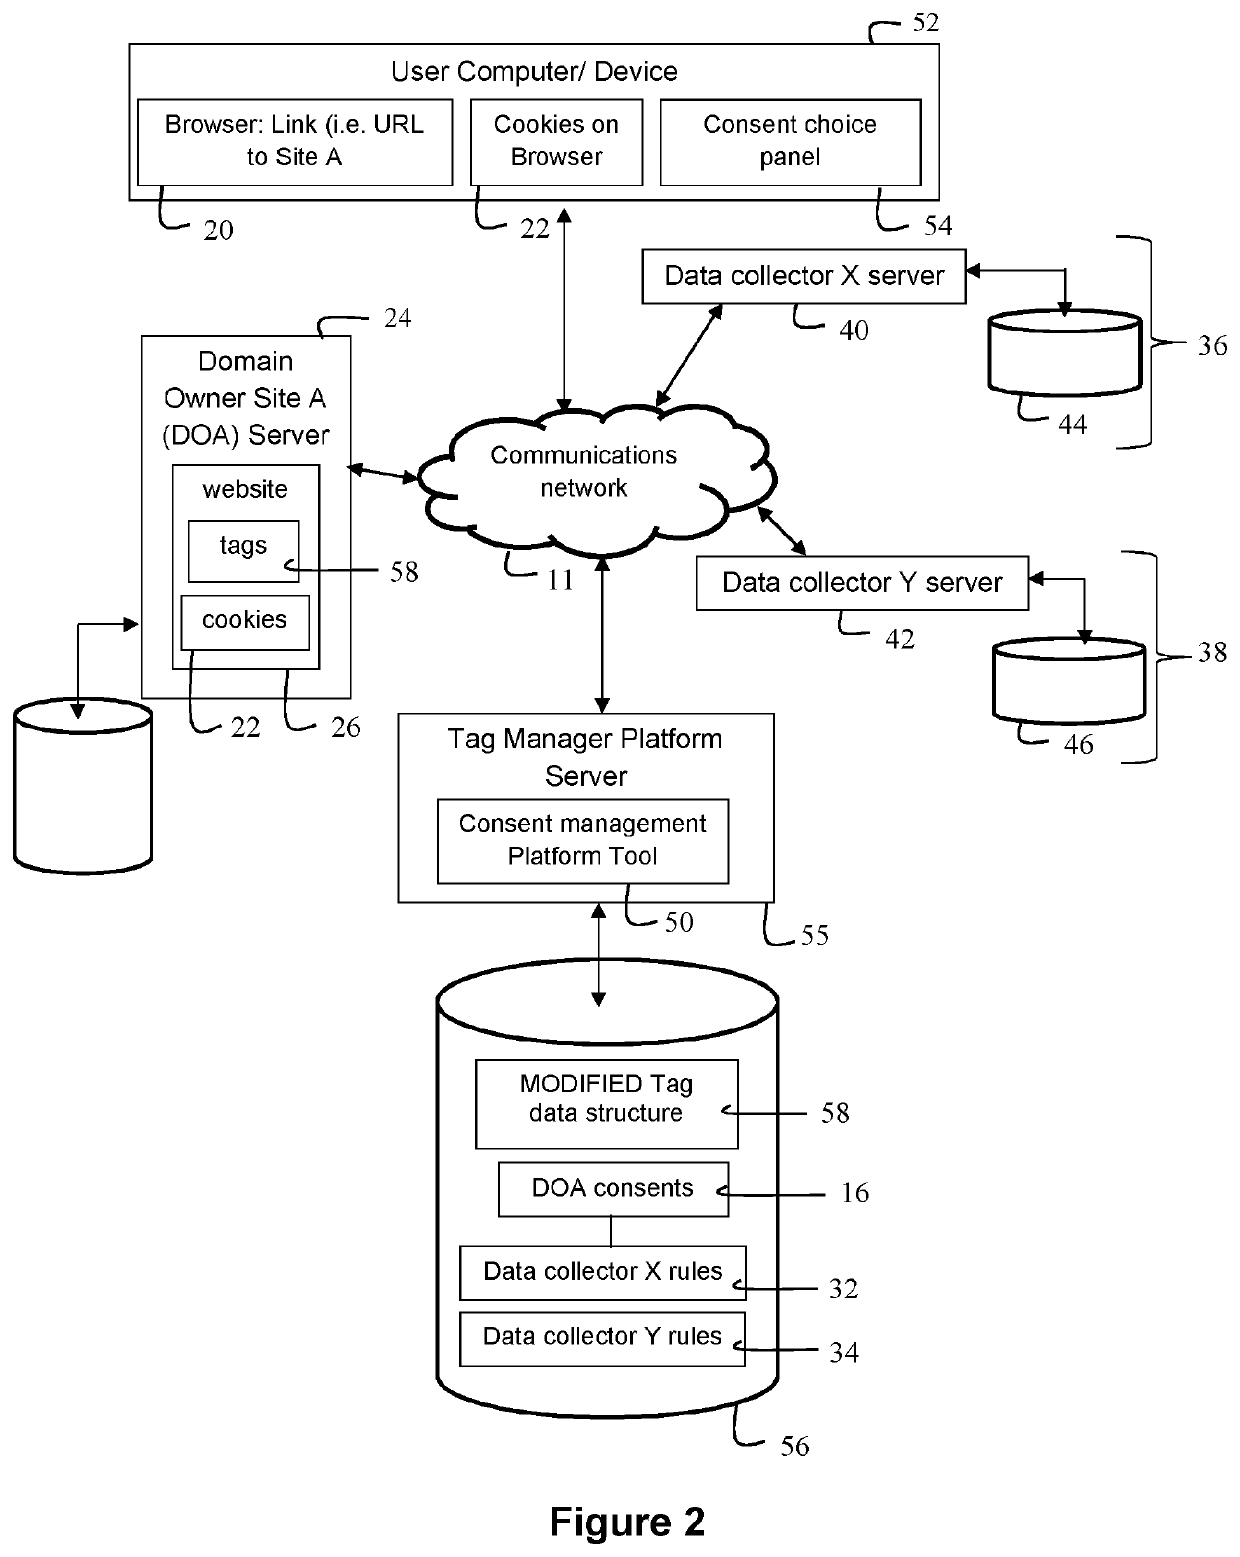 System for controlling user interaction via an application with remote servers